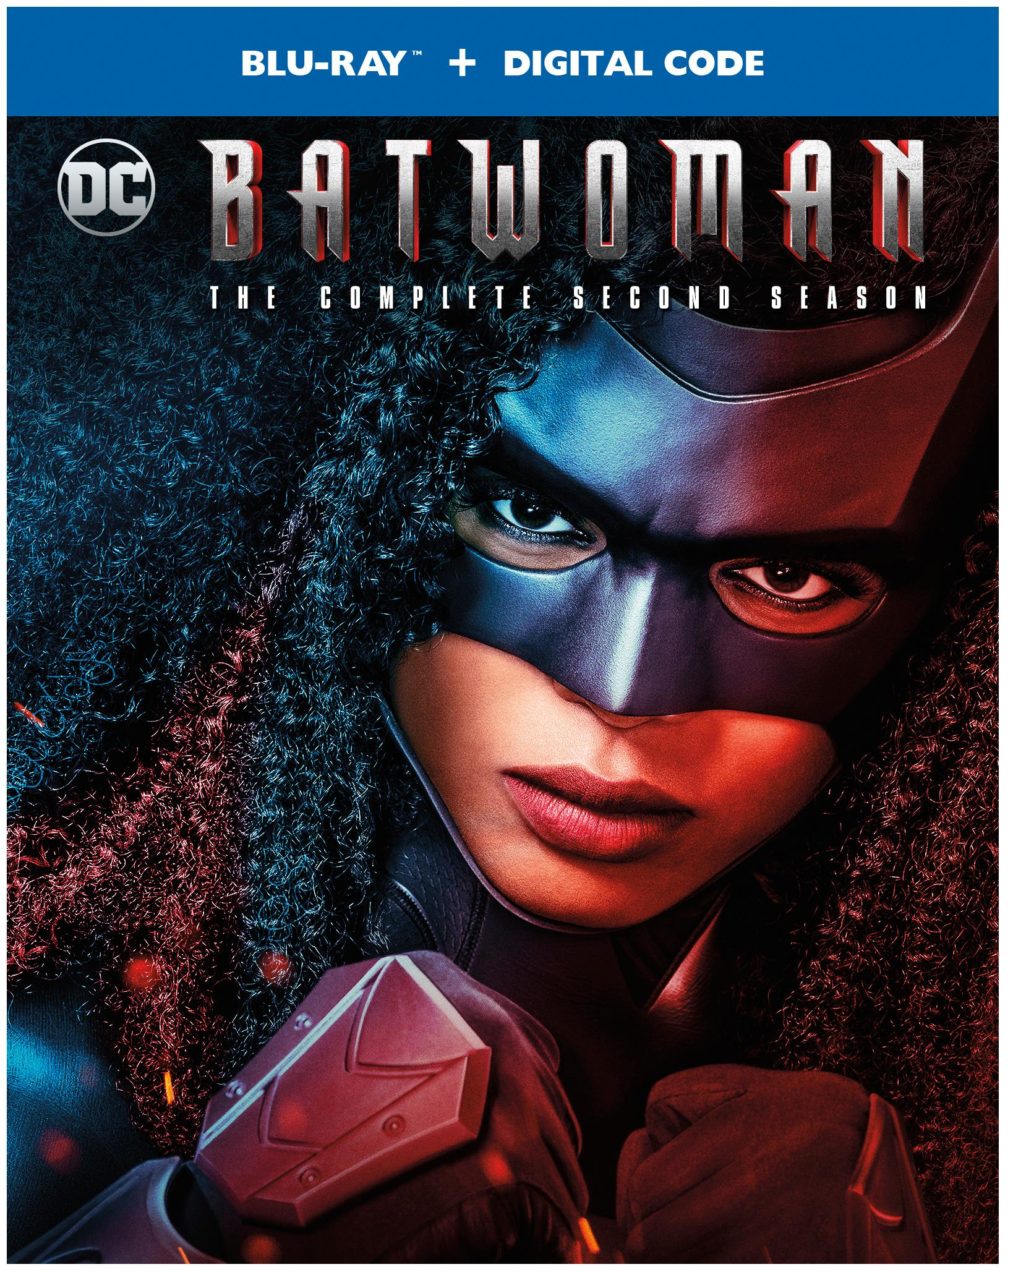 Batwoman: The Complete Second Season Blu-Ray Combo Pack cover (Warner Bros. Home Entertainment)